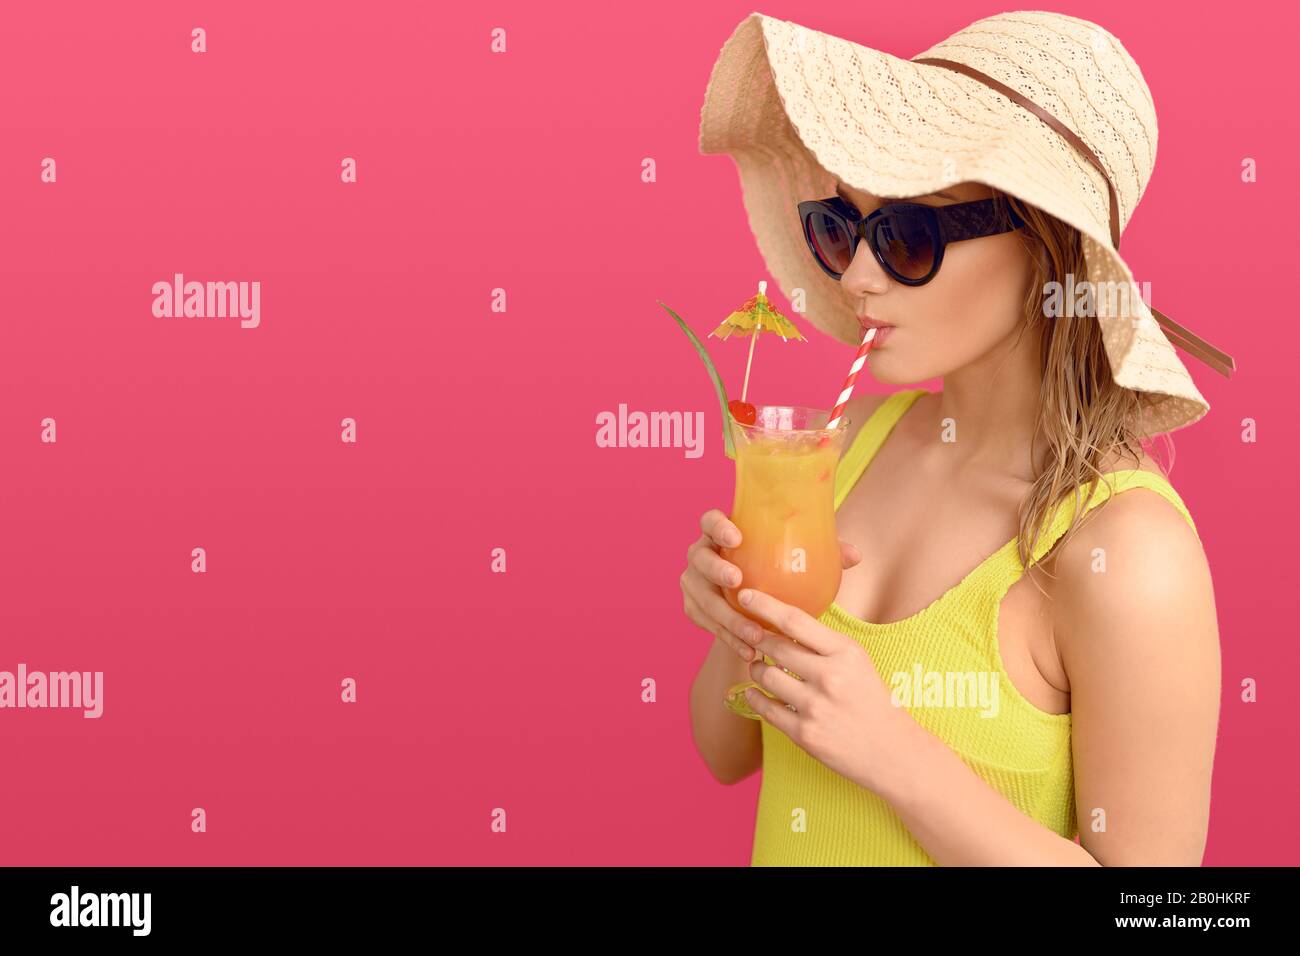 Young woman drinking a tropical cocktail on summer vacation wearing a yellow swimsuit sunglasses and wide brimmed sunhat in a side view over a pink ba Stock Photo